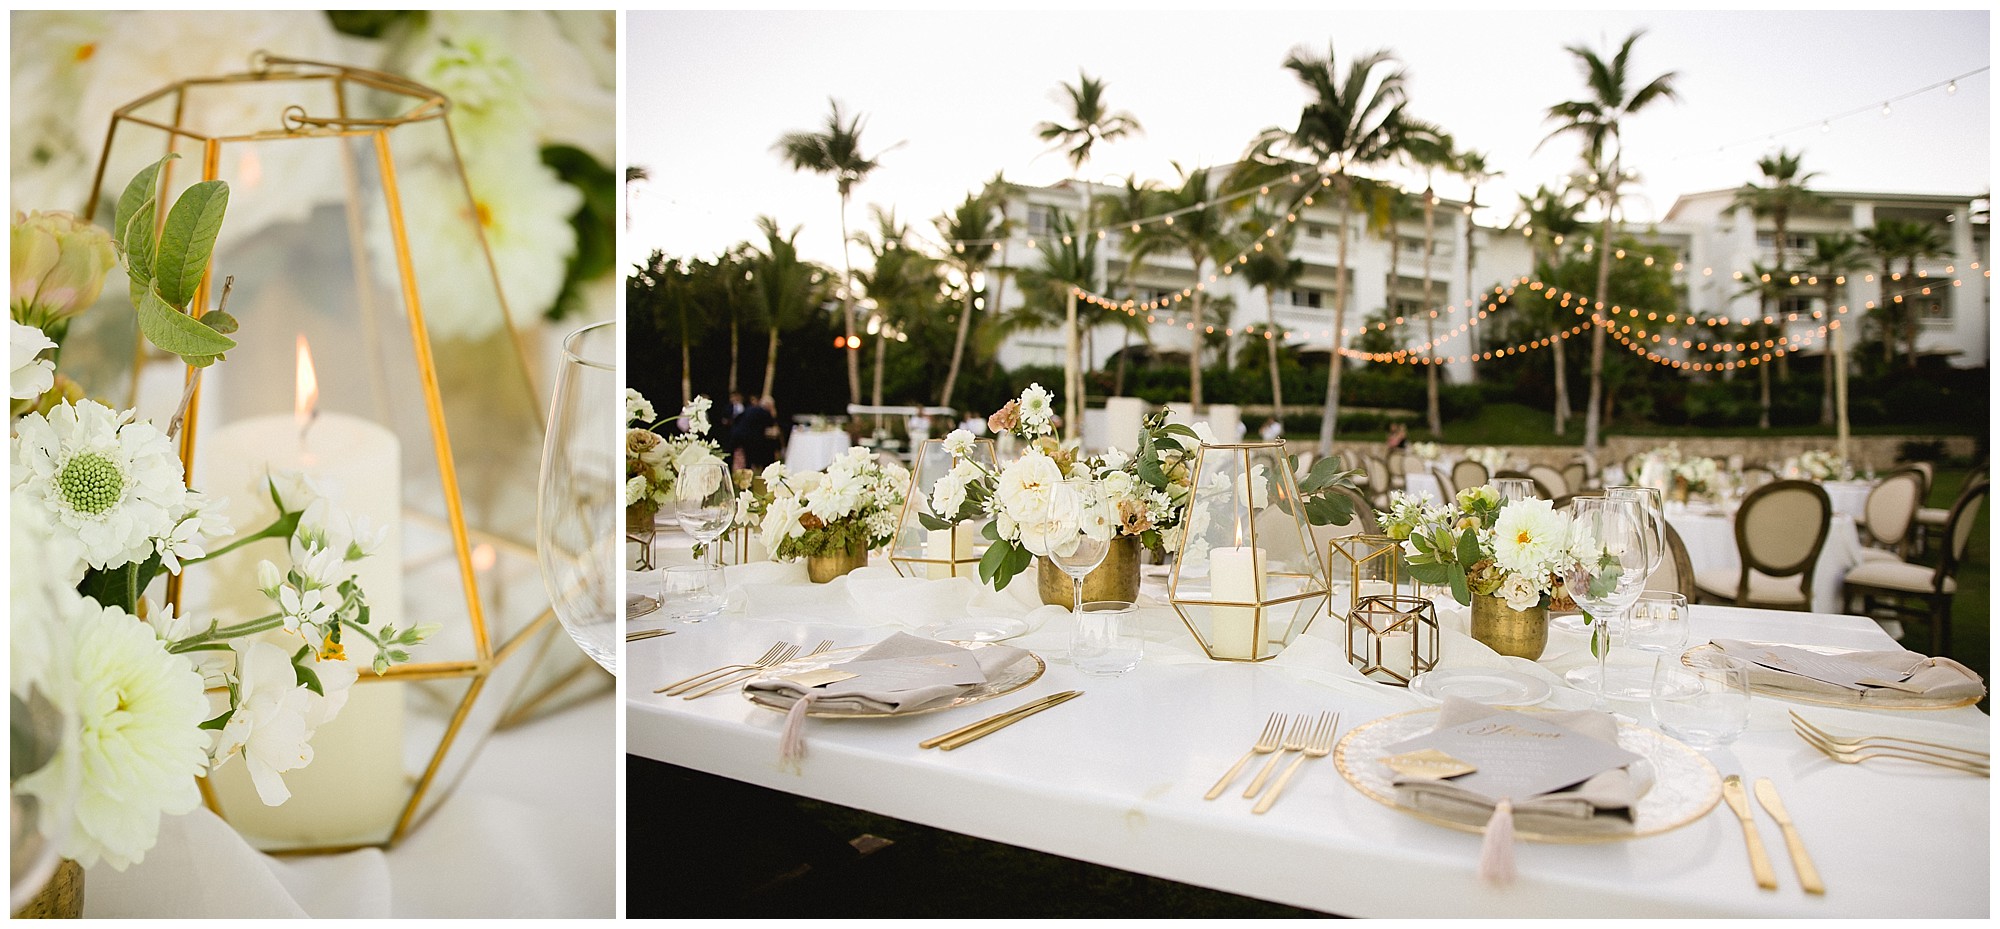 spectacular table settings at One&Only Palmilla wedding